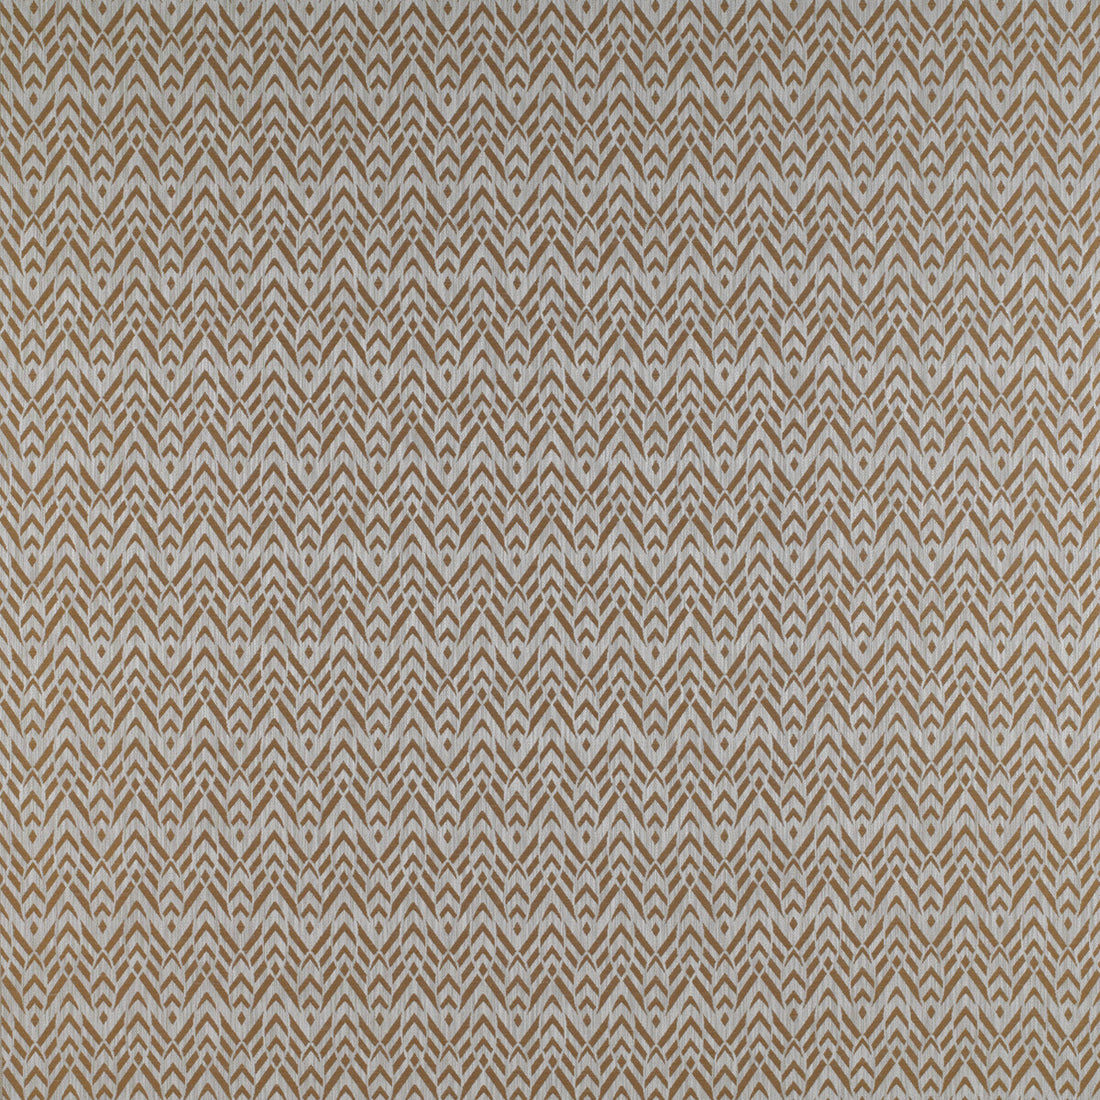 Cervantes fabric in oro/viejo color - pattern GDT5200.008.0 - by Gaston y Daniela in the Madrid collection